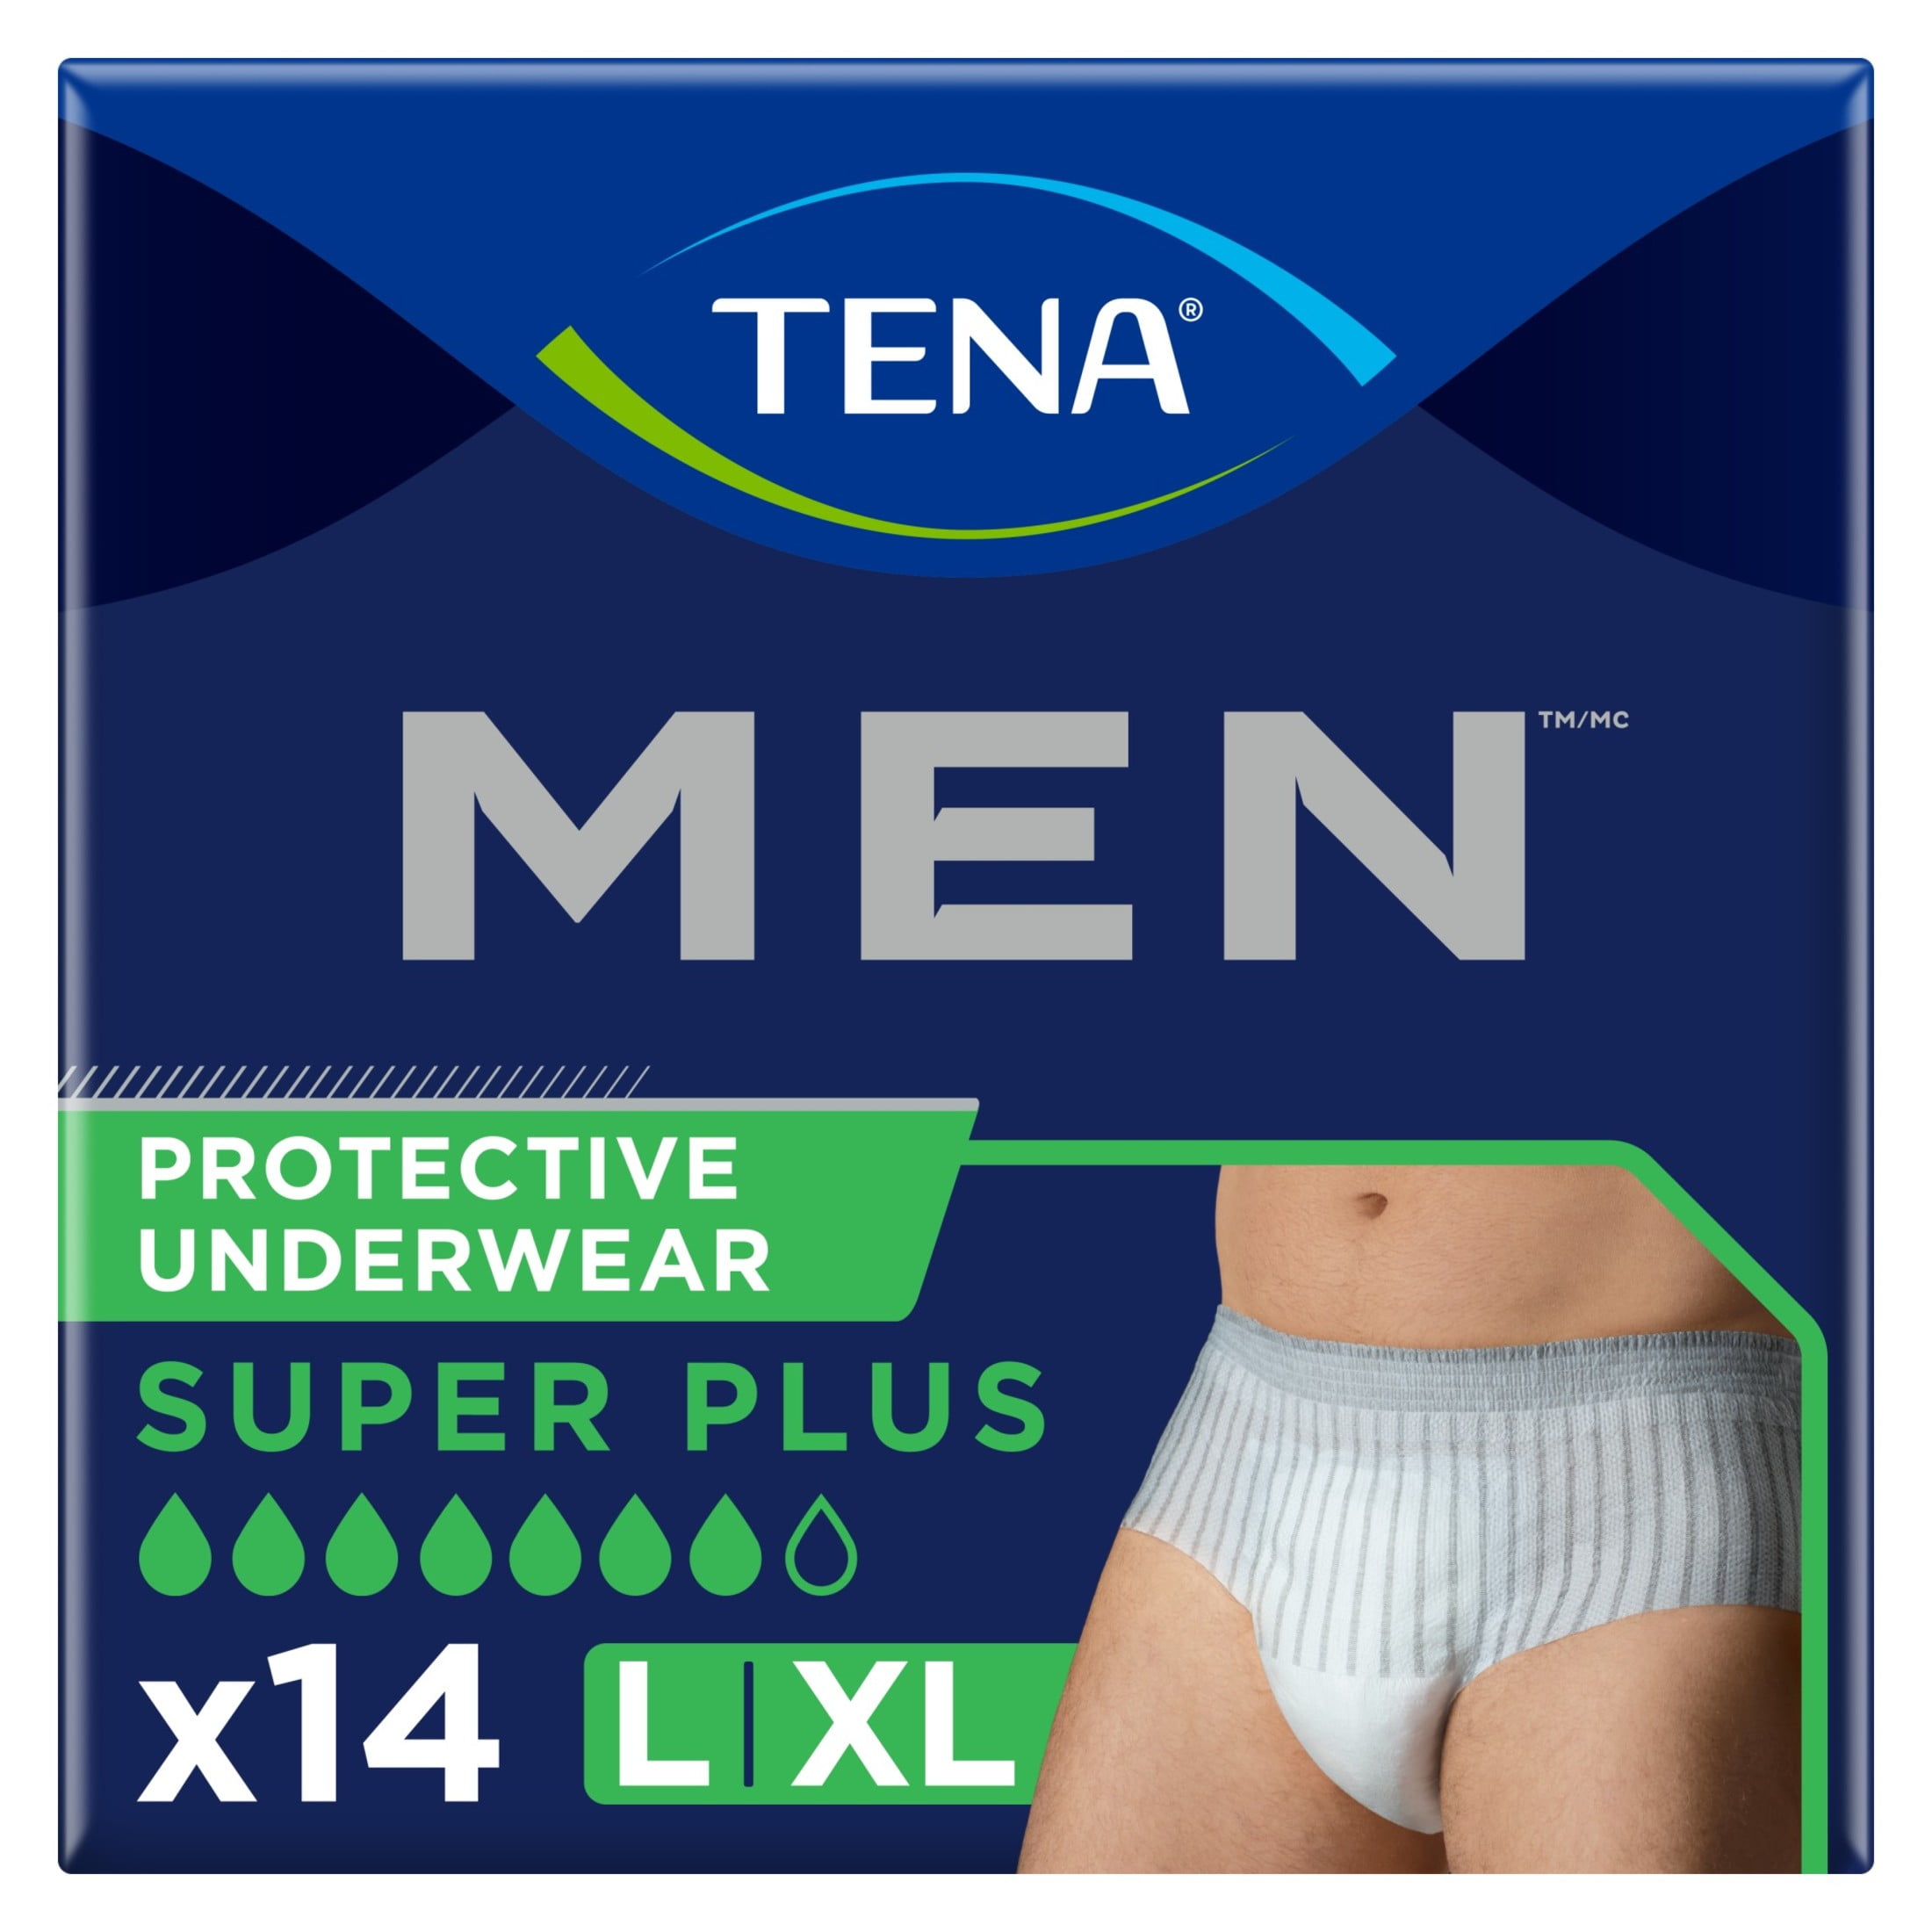 TENA ProSkin Overnight™ Super Fully Breathable Underwear with Lie Down  Protection